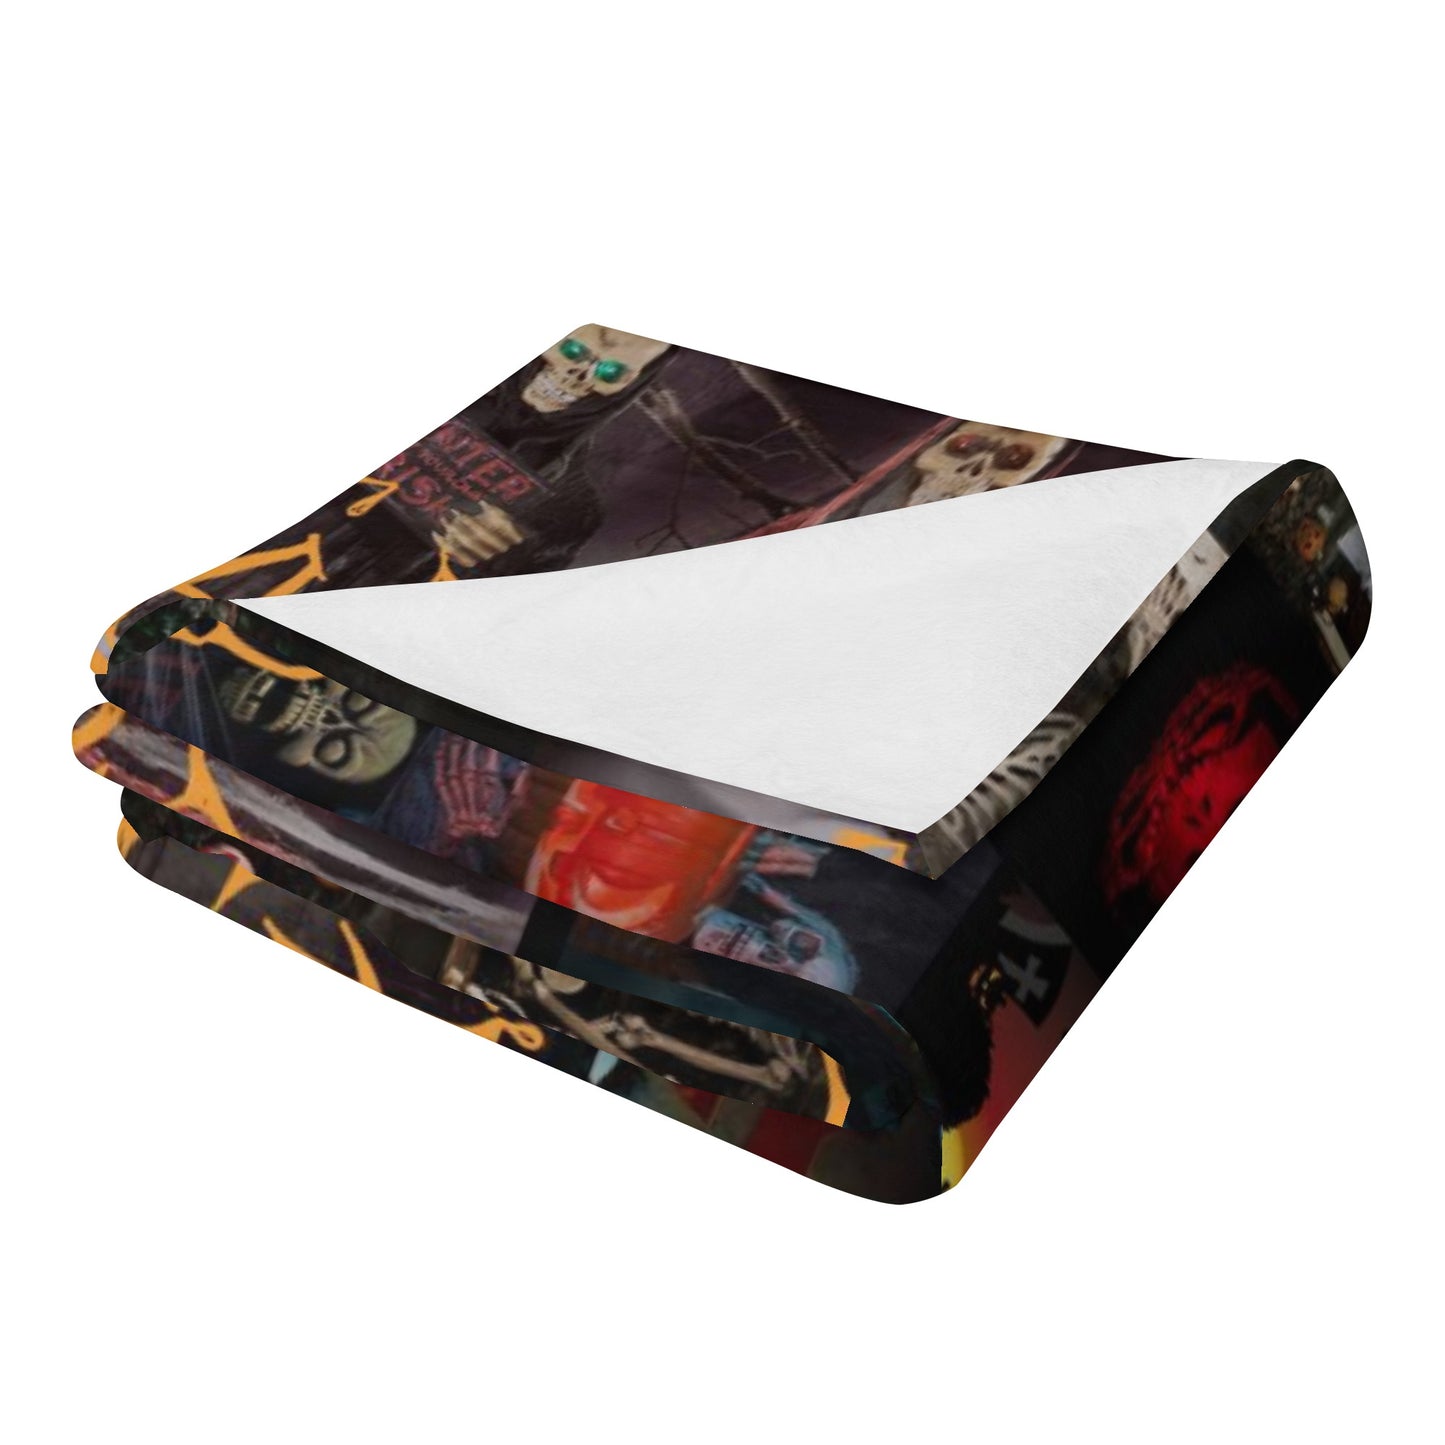 A Halloween Party Vertical Flannel Breathable Blanket 4 Sizes